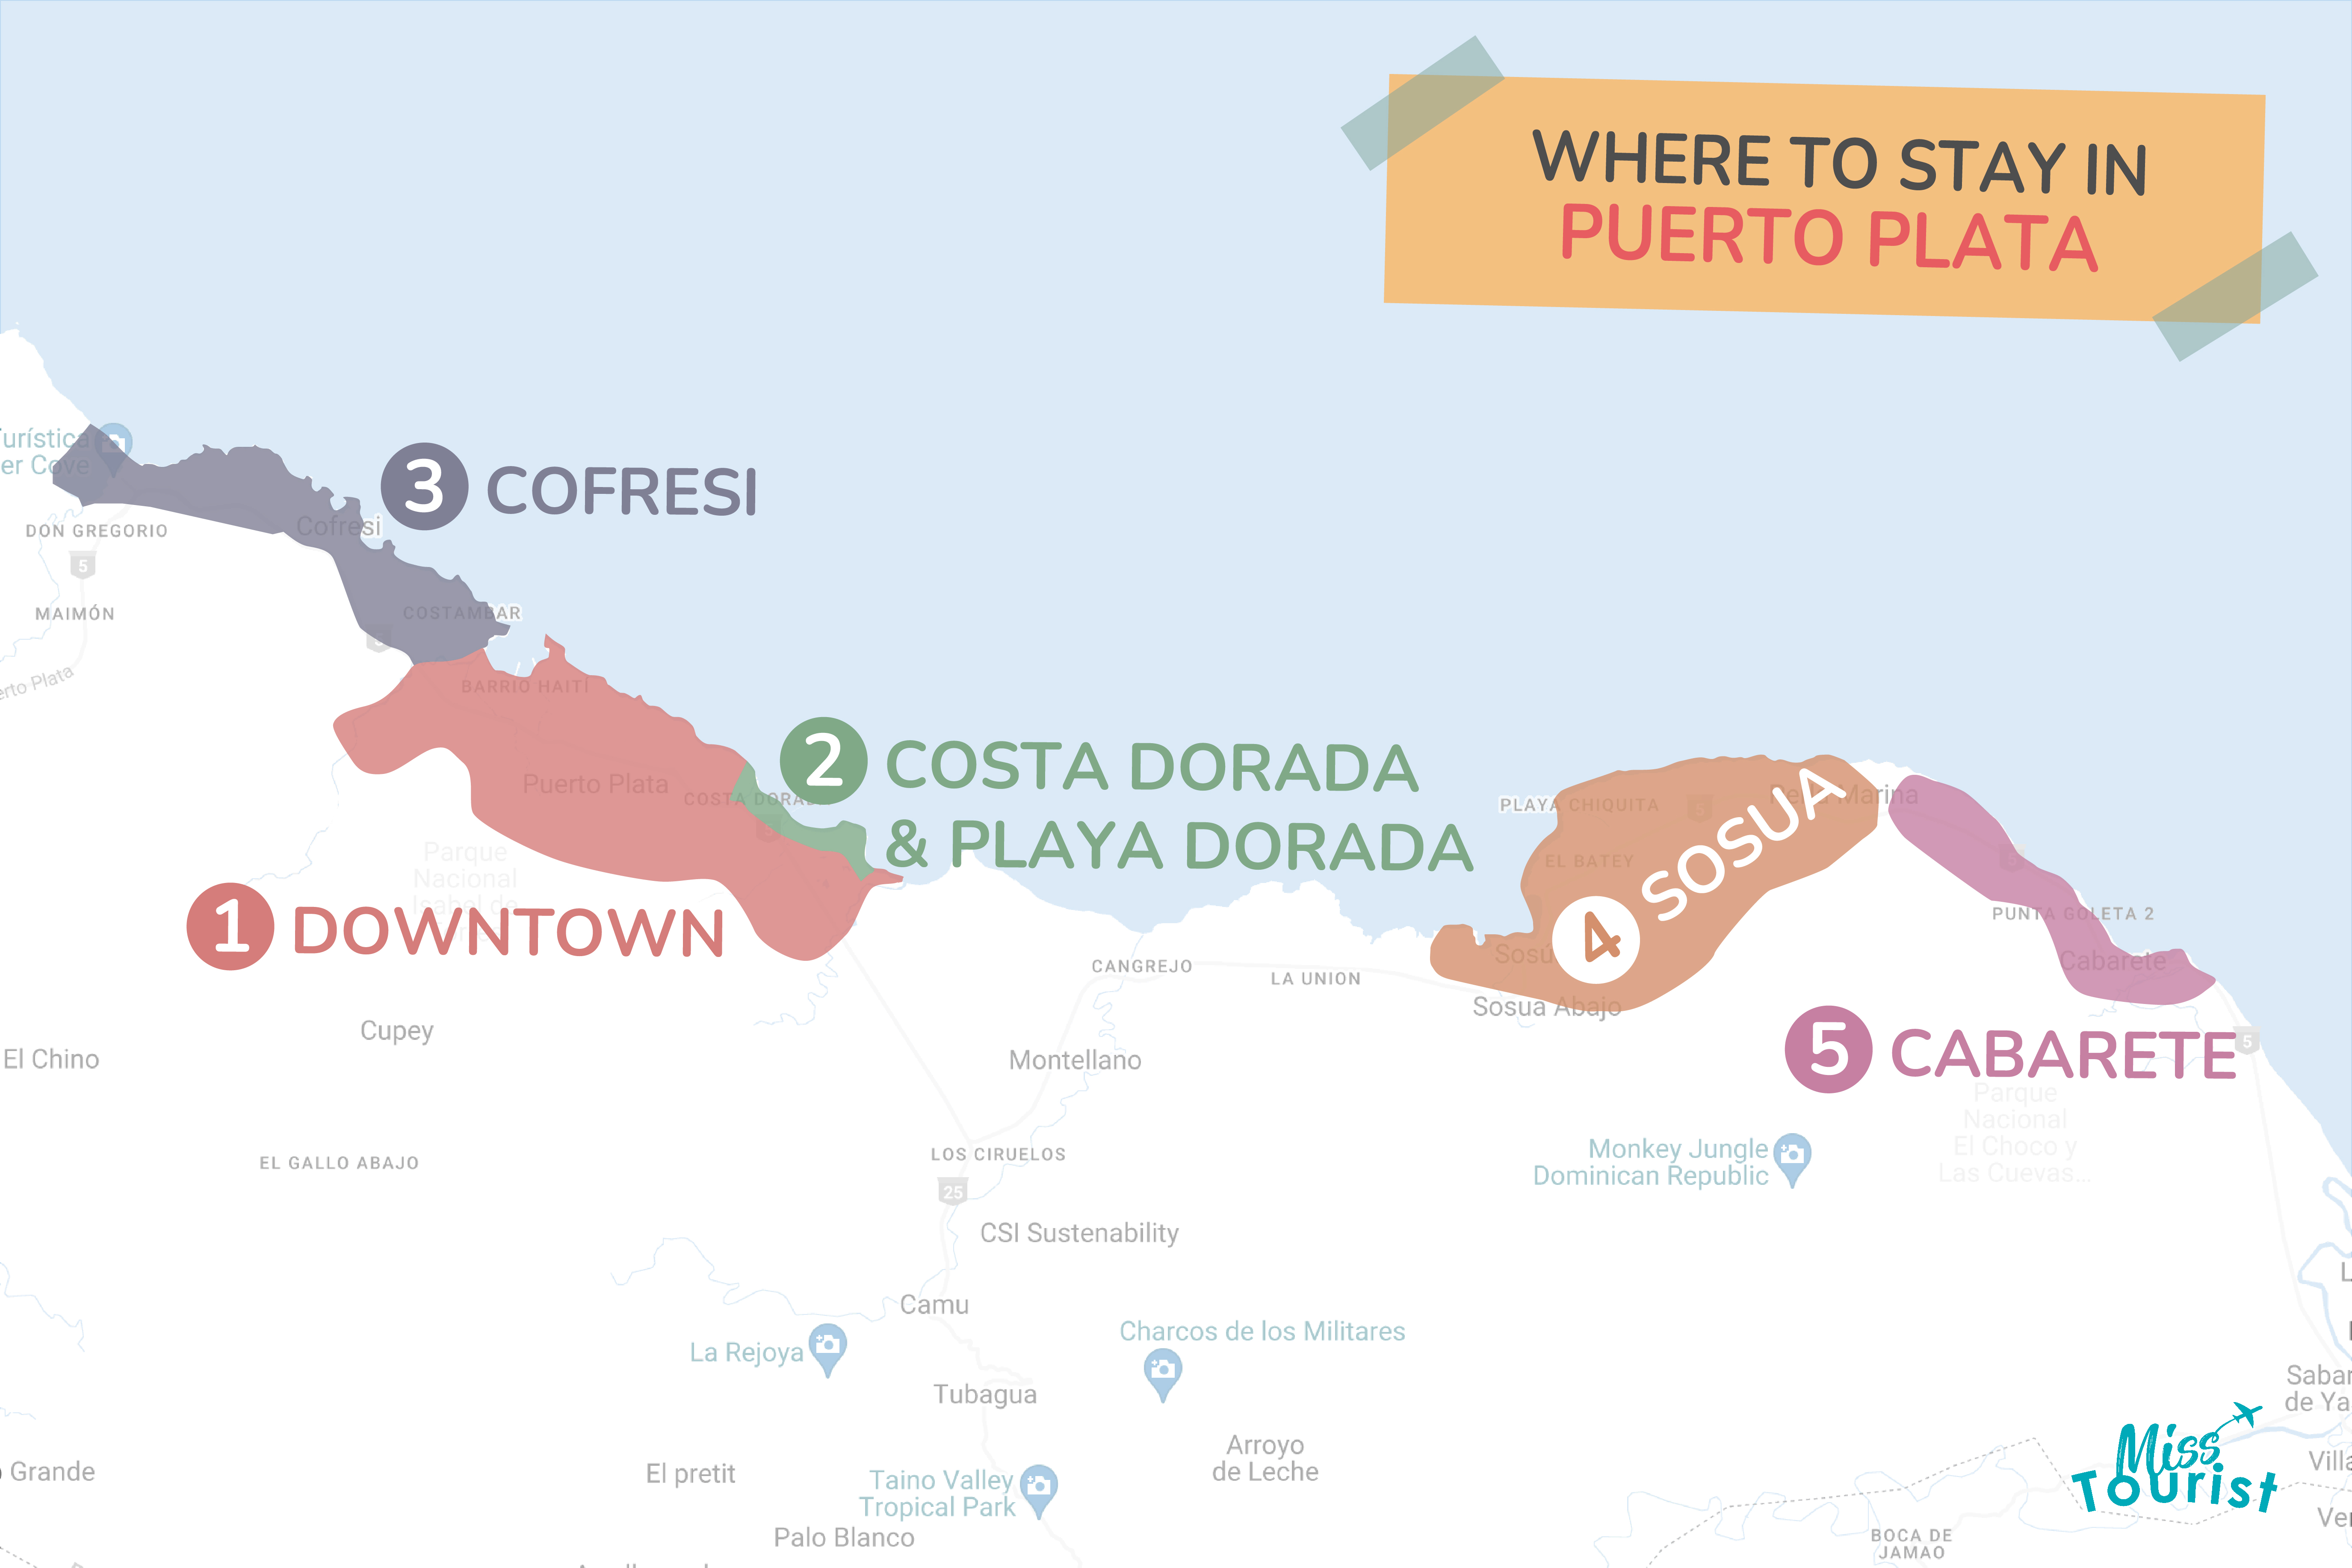 map of puerto plata and all the regions to stay in